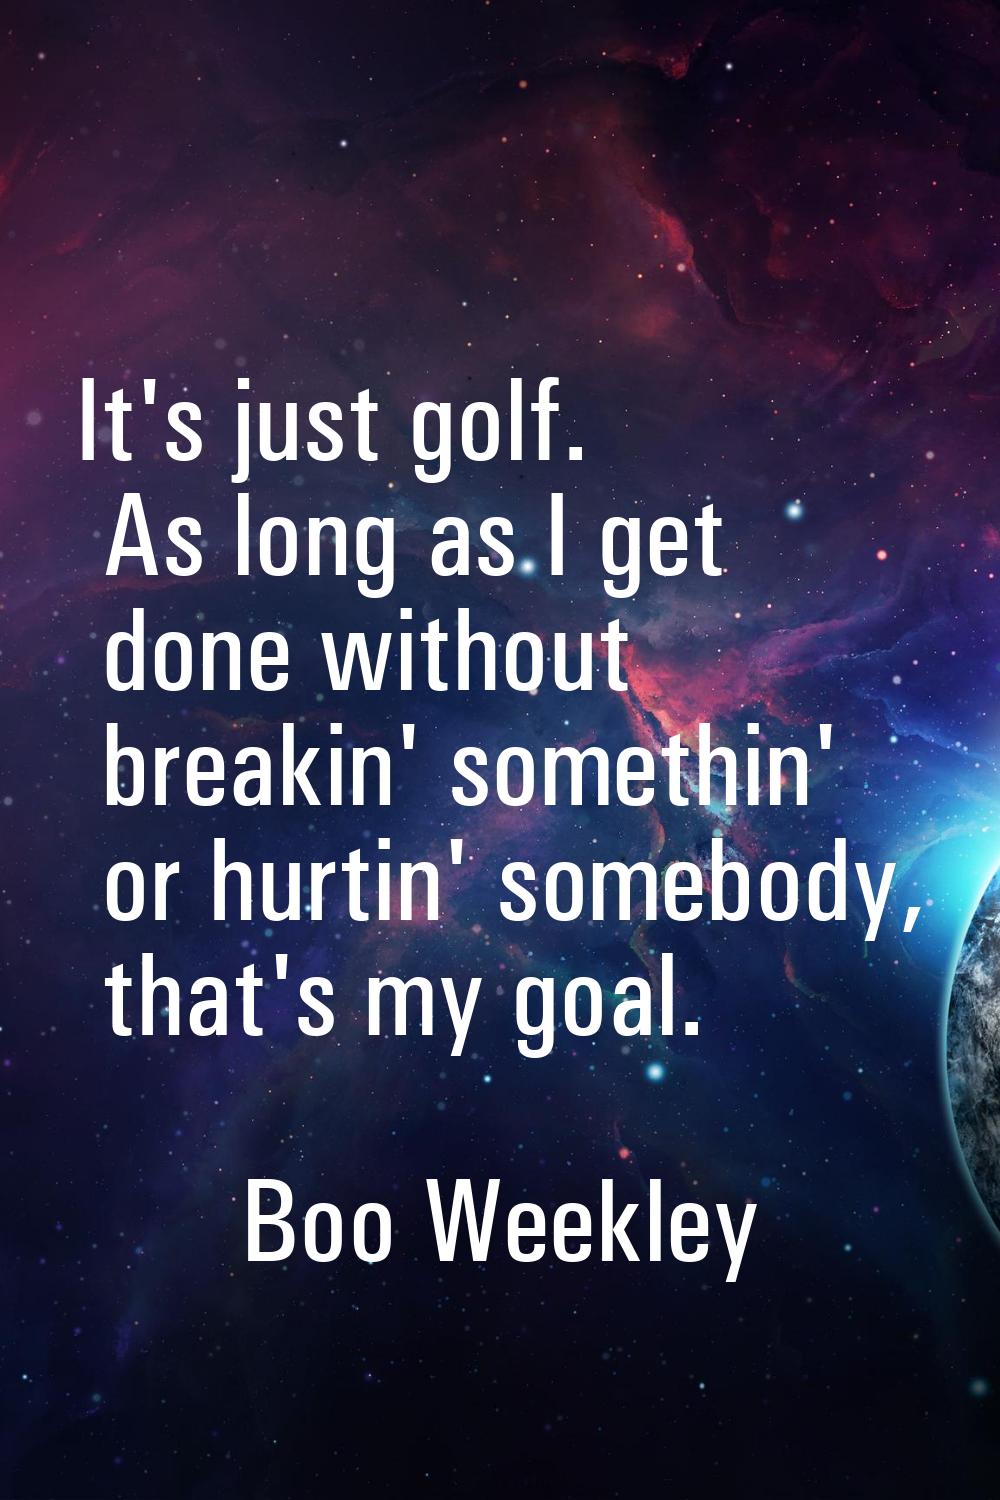 It's just golf. As long as I get done without breakin' somethin' or hurtin' somebody, that's my goa